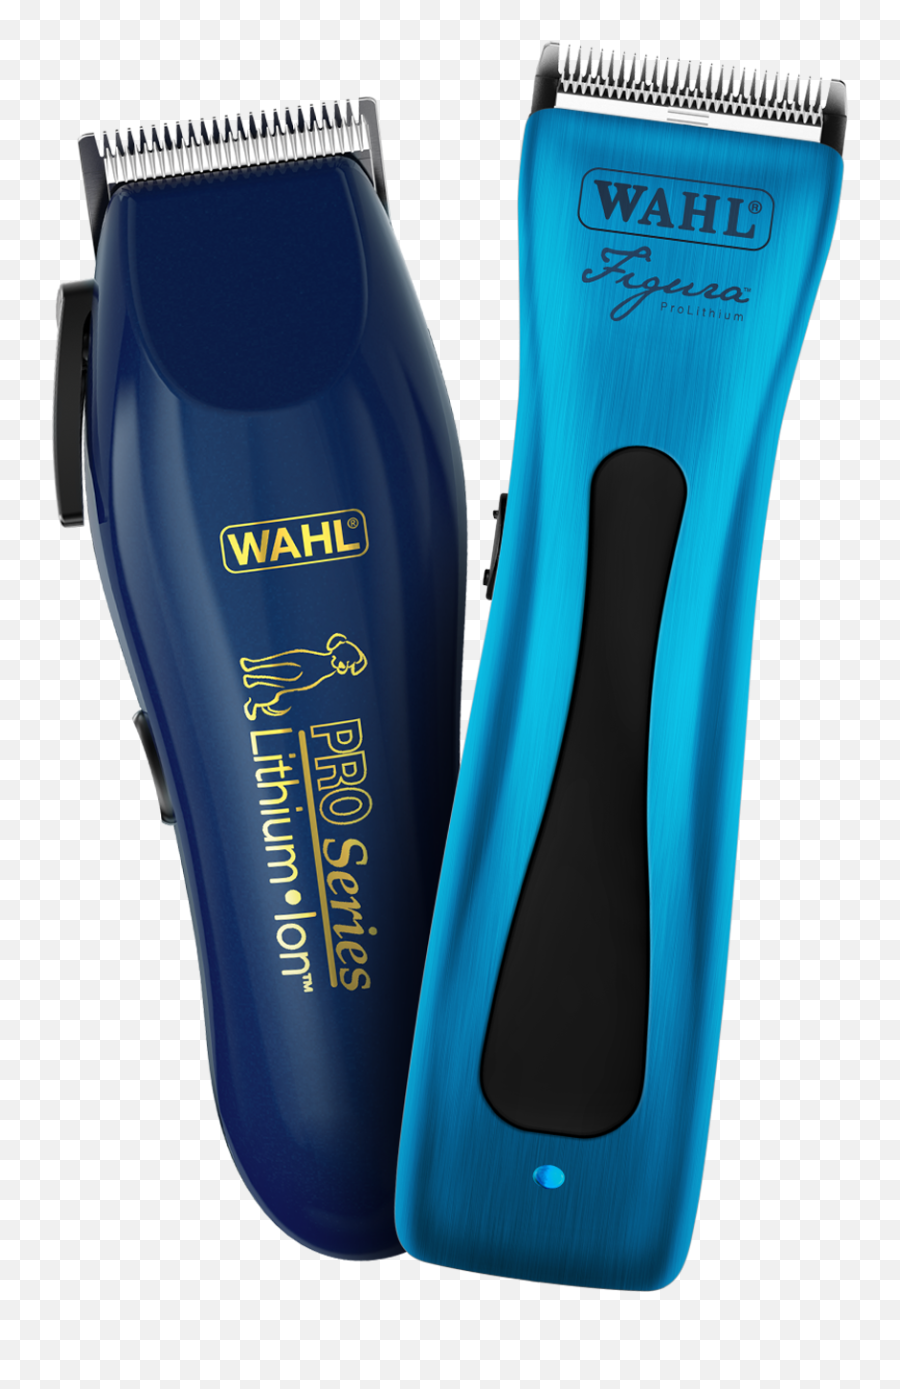 Wahl 5 In 1 Dog Clipper Blade Attachment Petbarn - Grooming Trimmer Png,Wahl 5 Star Icon Clipper